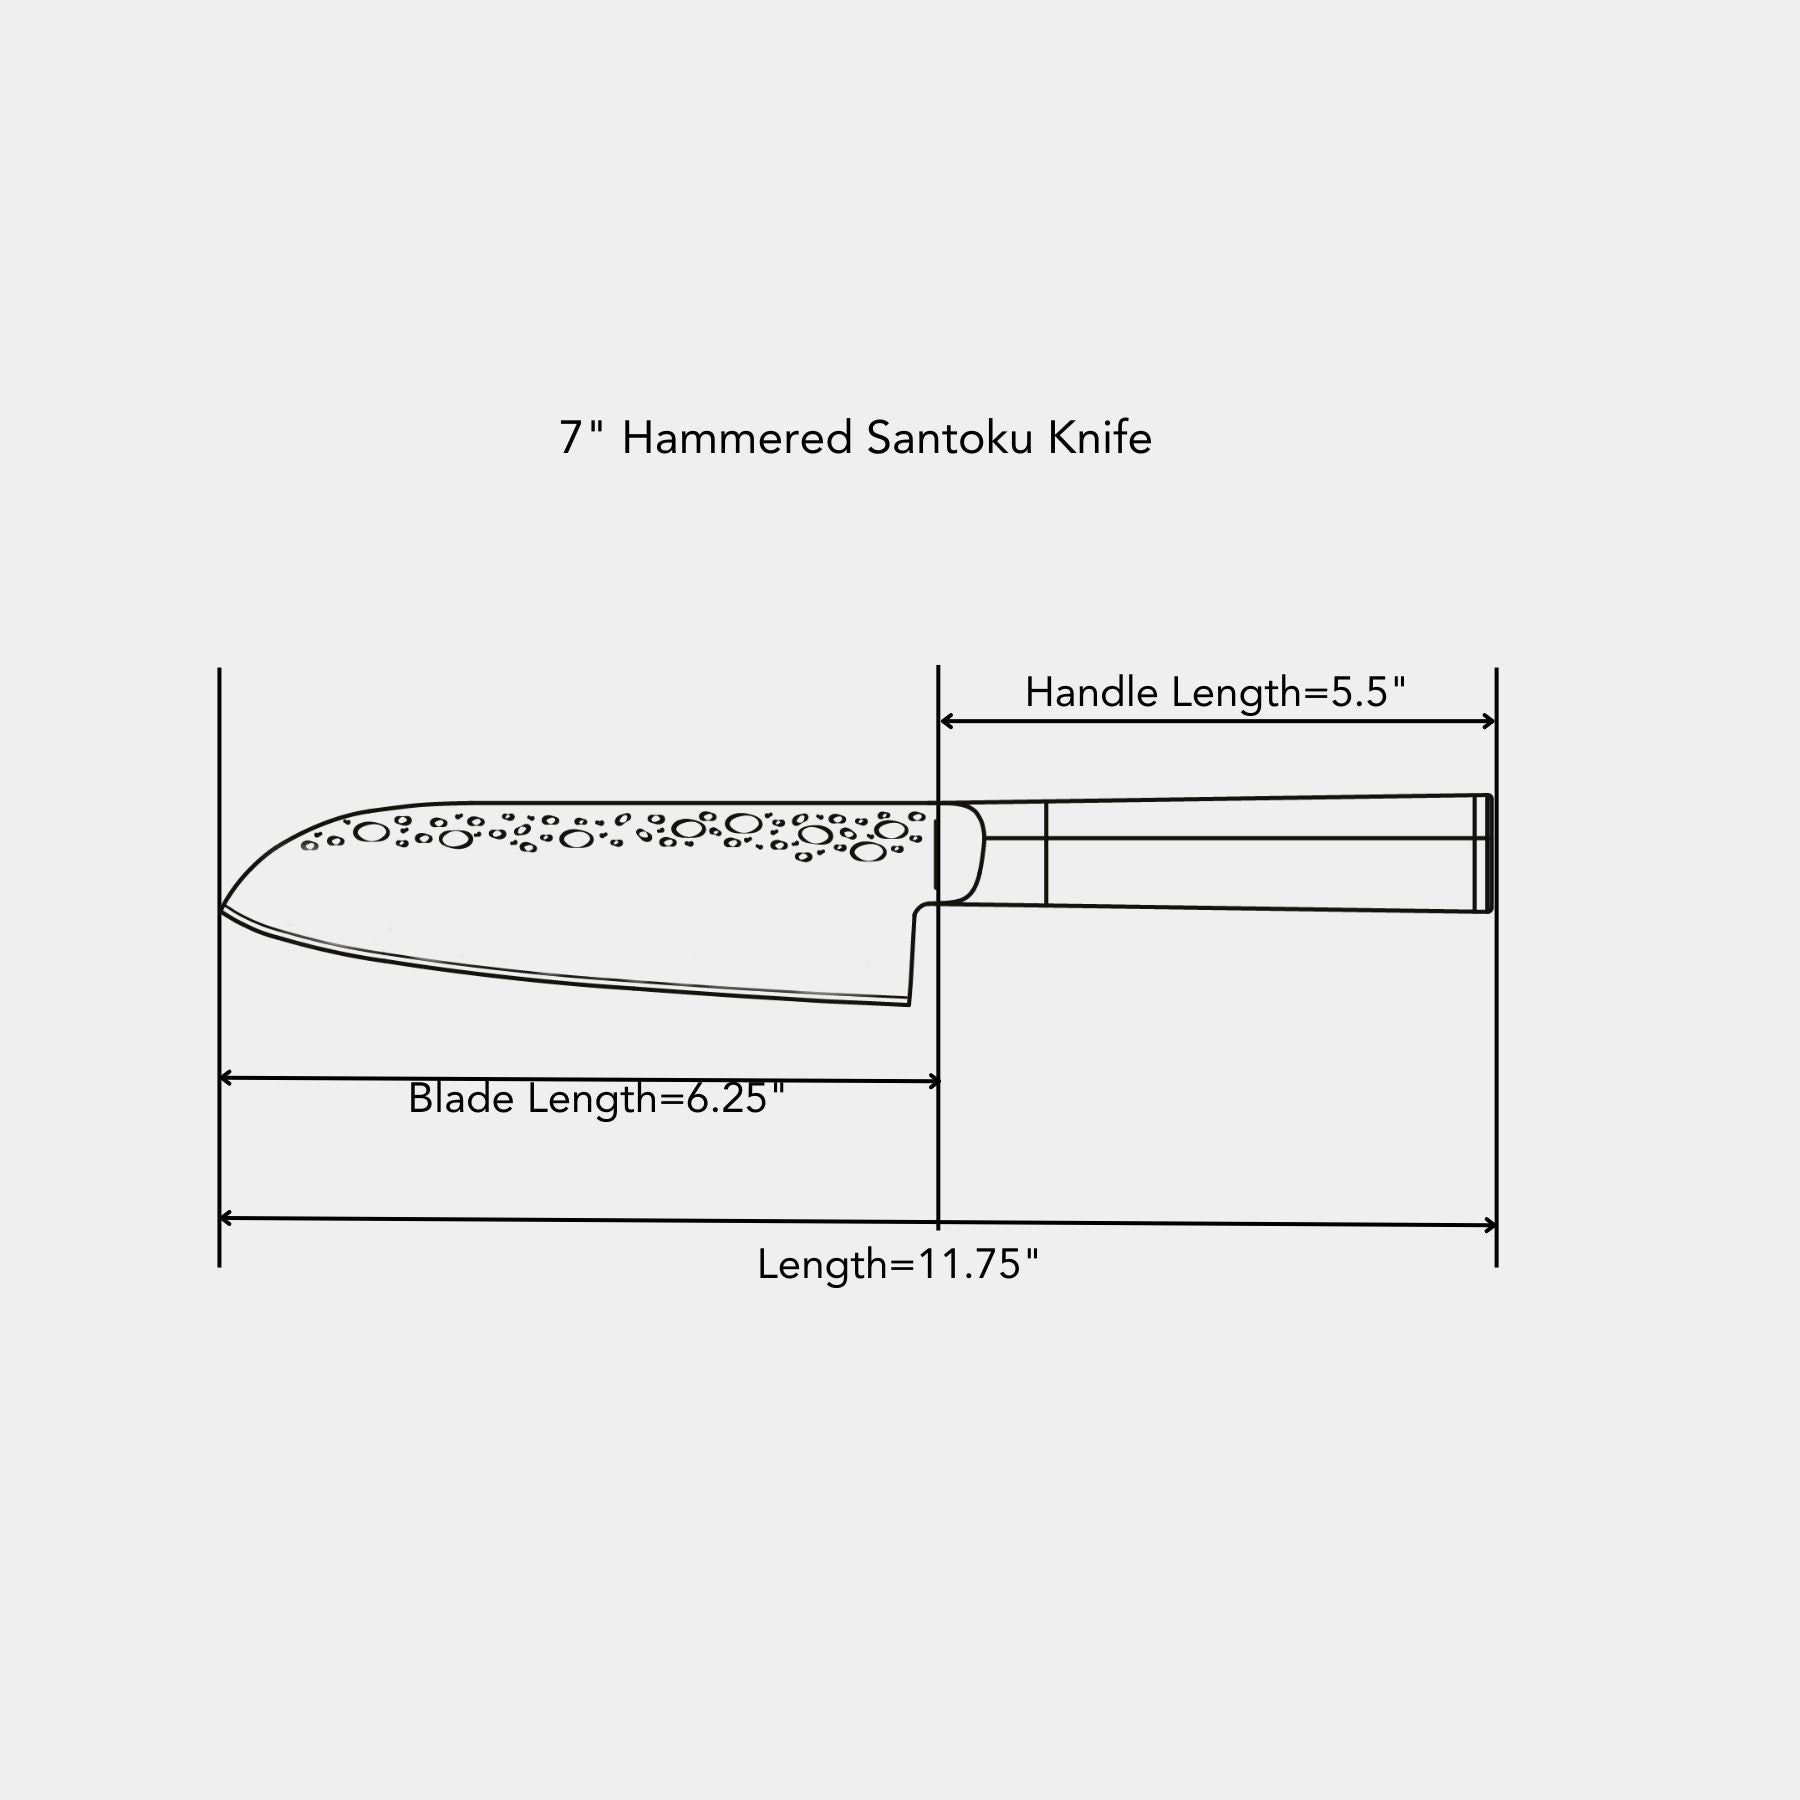 7" Hammered Santoku Knife dimensions of blade and handle length